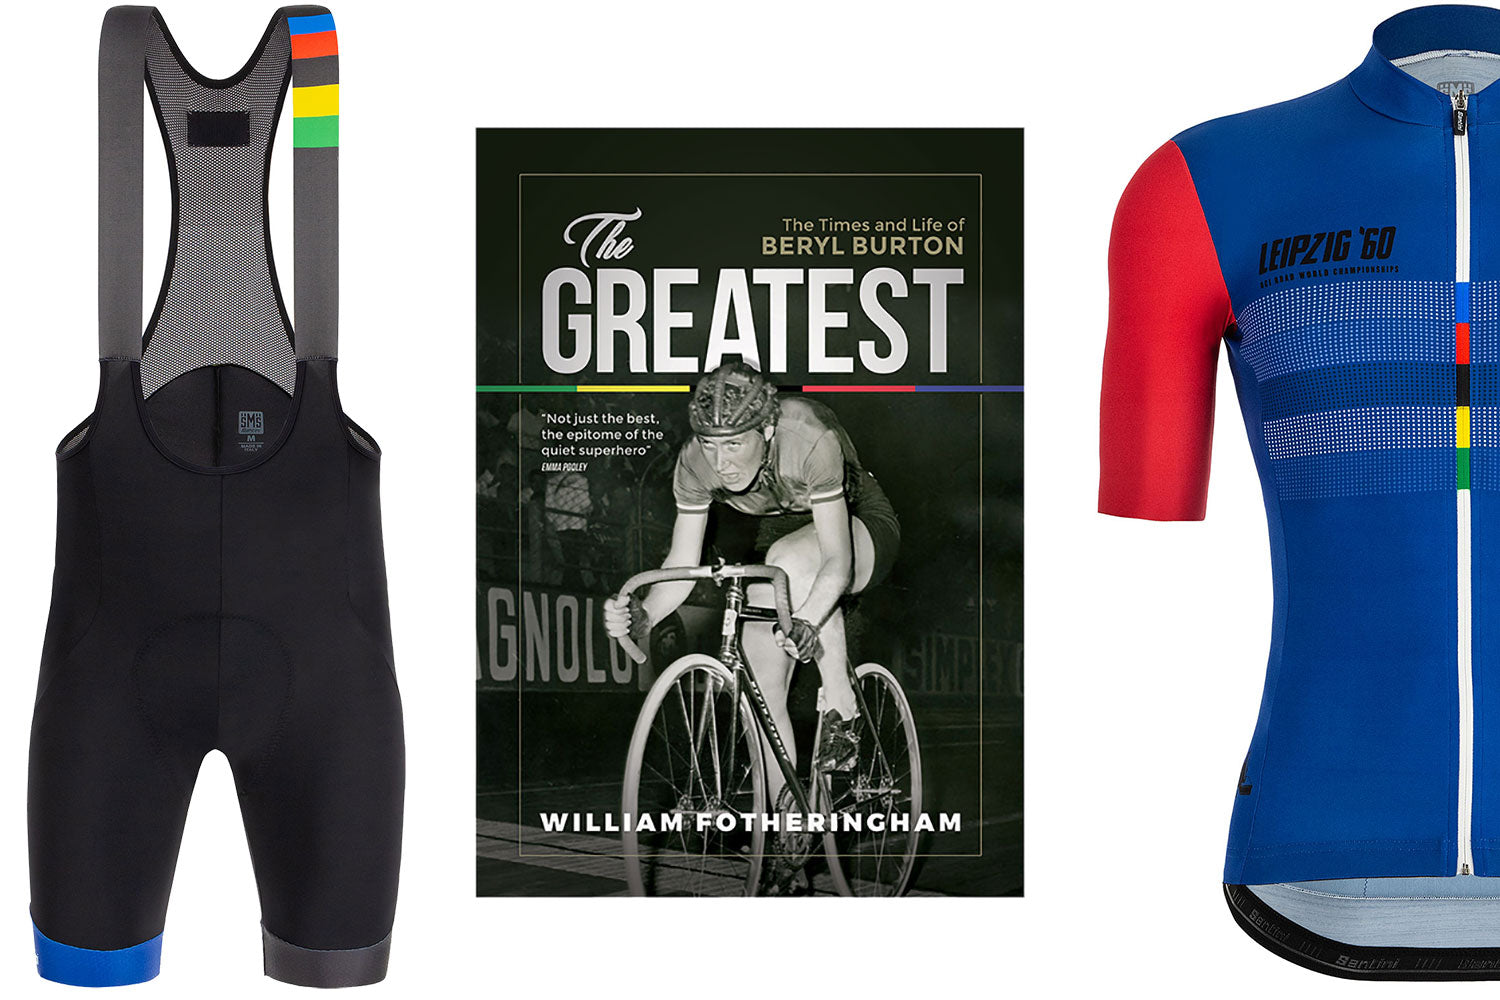 The Times and Life of Beryl Burton Book by William Fotheringham is also available from Prendas Ciclismo. A unique Beryl Burton jersey and matching shorts are also available.